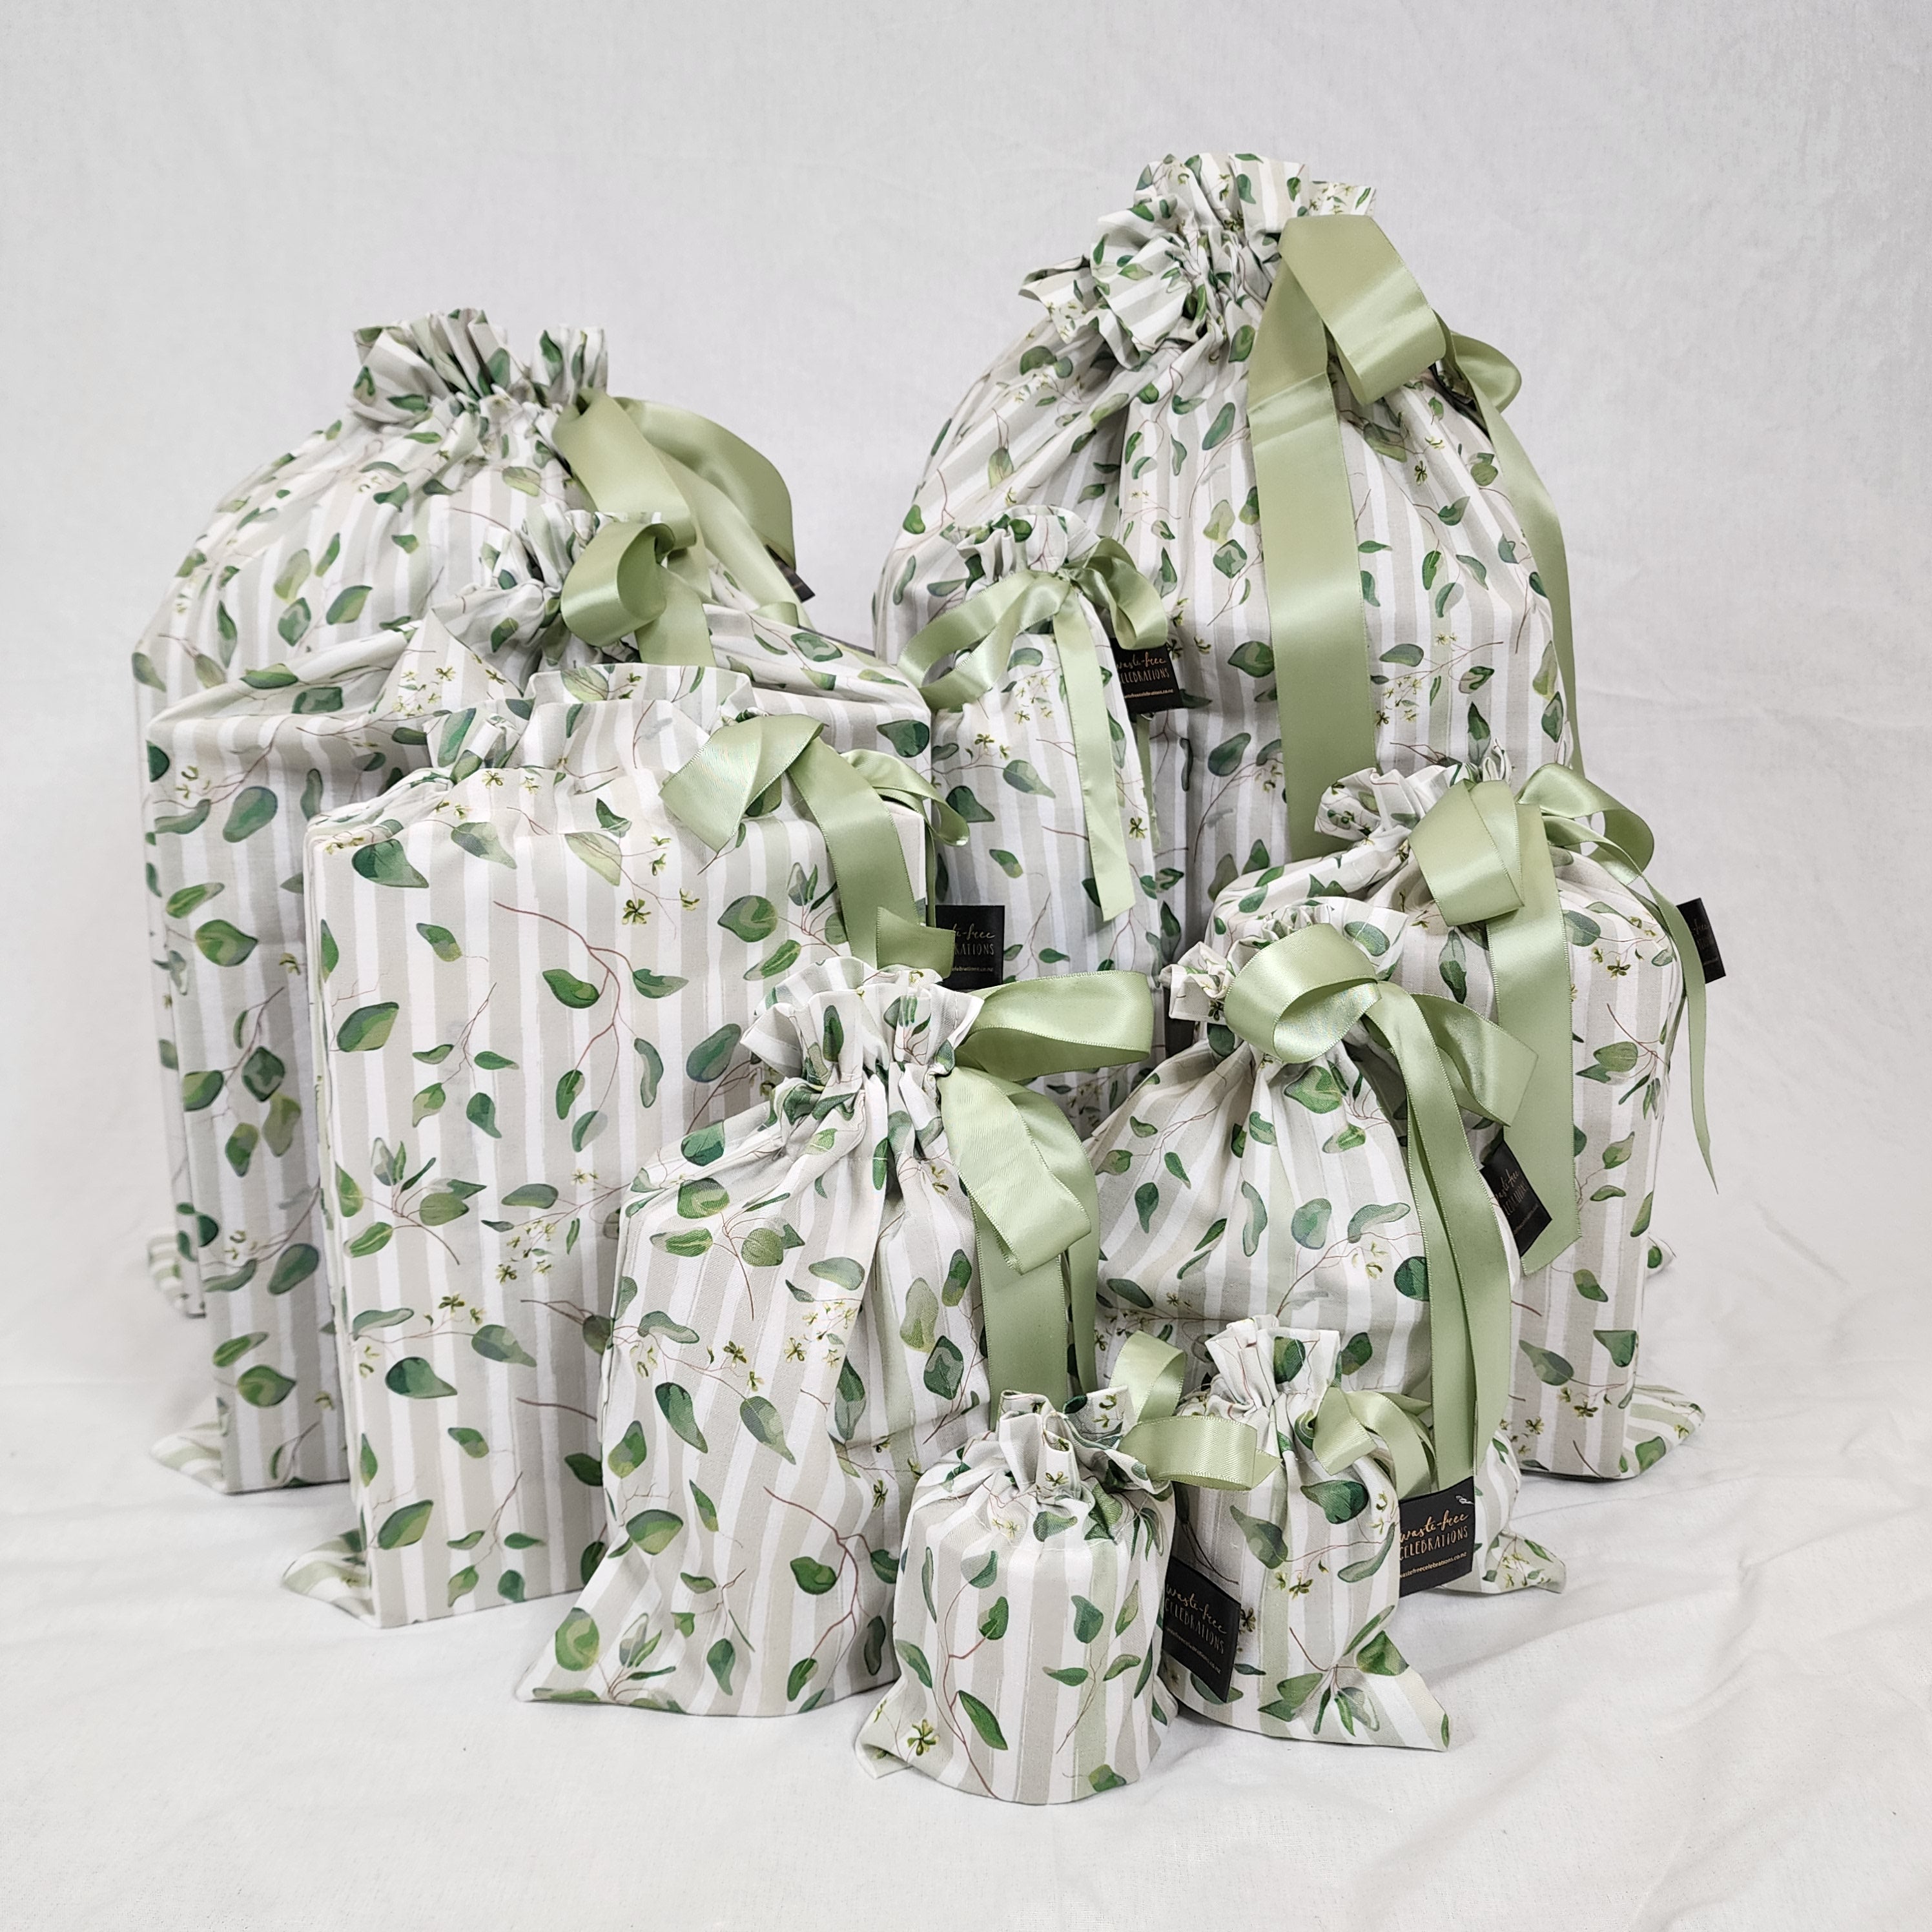 Set of 10 Reusable Gift Bags (Samples and Clearance)